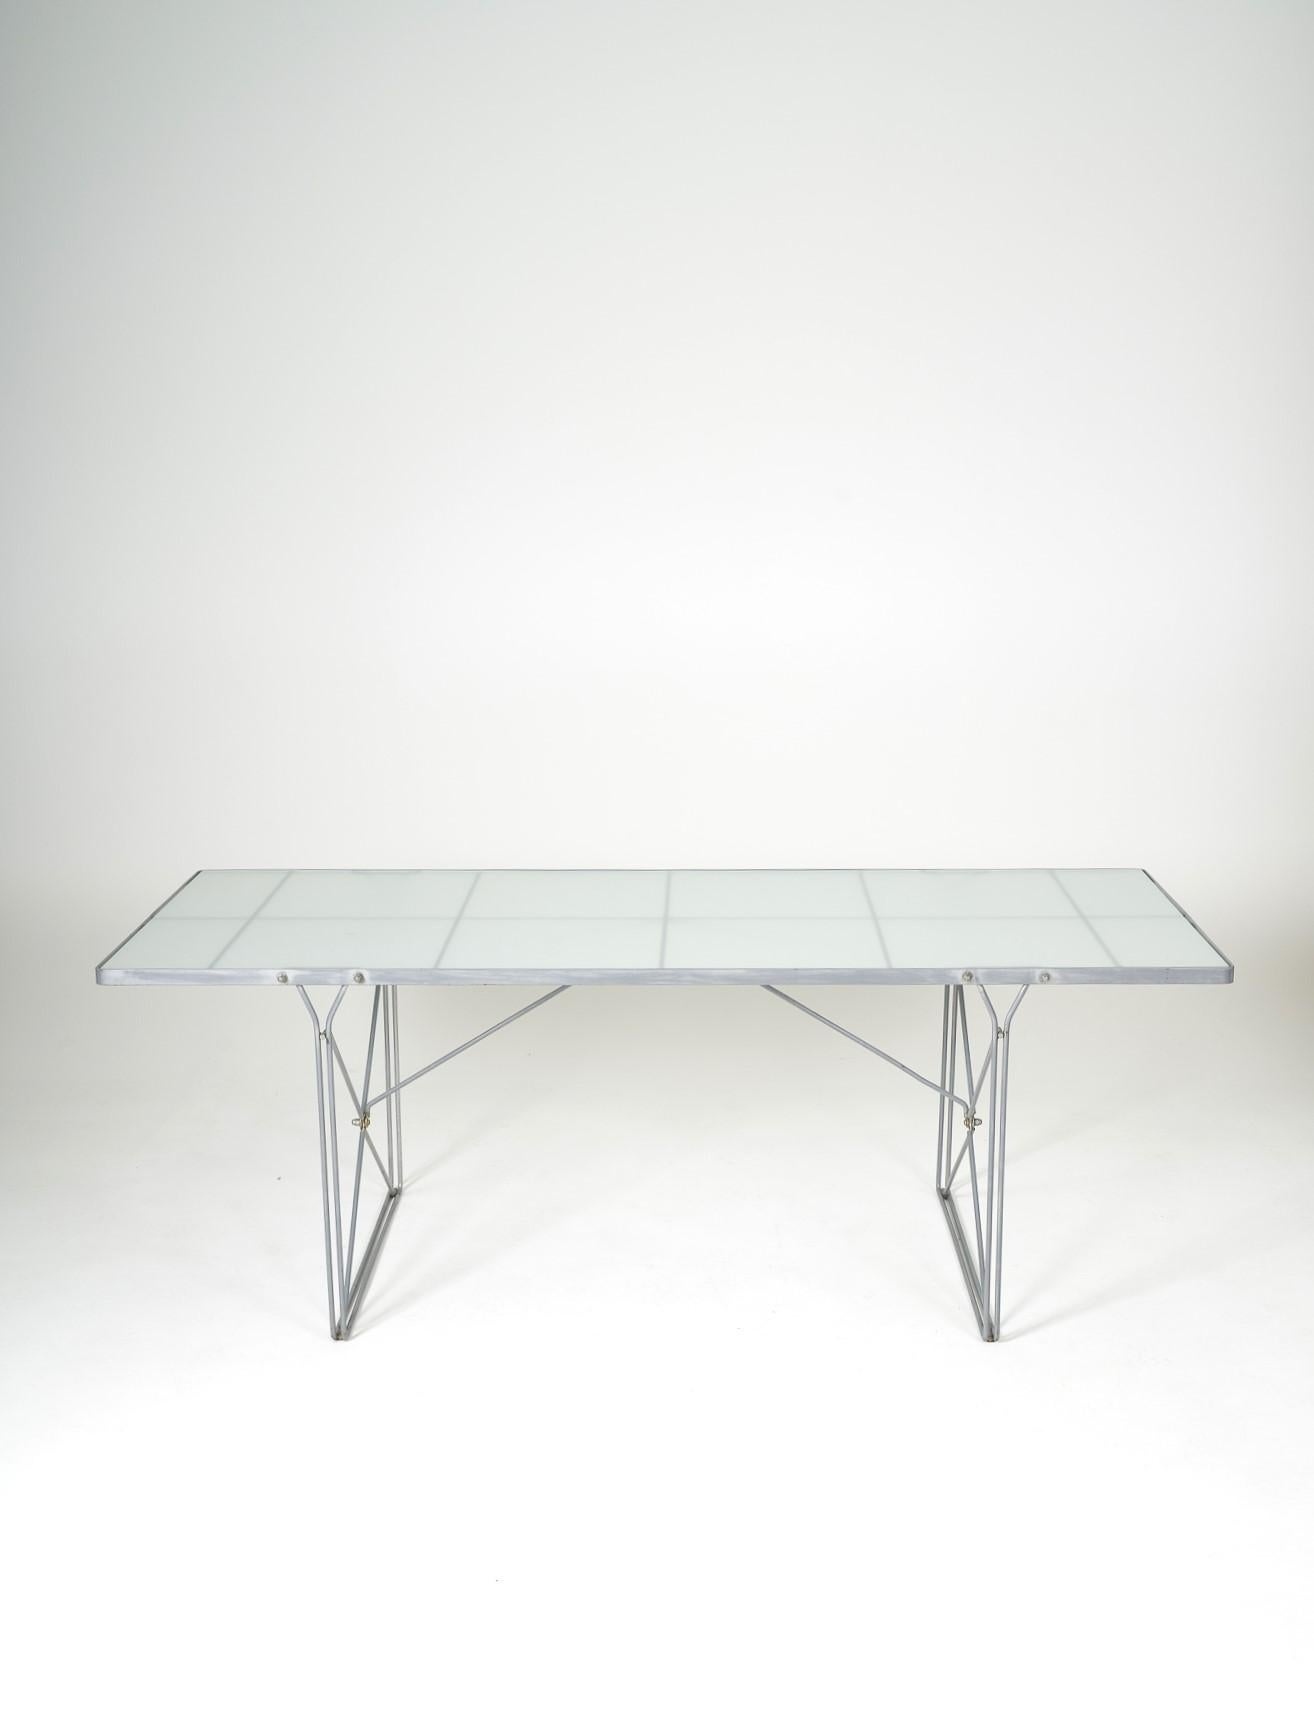 Vintage dining table by Niels Gammelgaard for Ikea, produced in the 80s. Grey steel frame and glass top. Very good condition with some traces of use on the base.